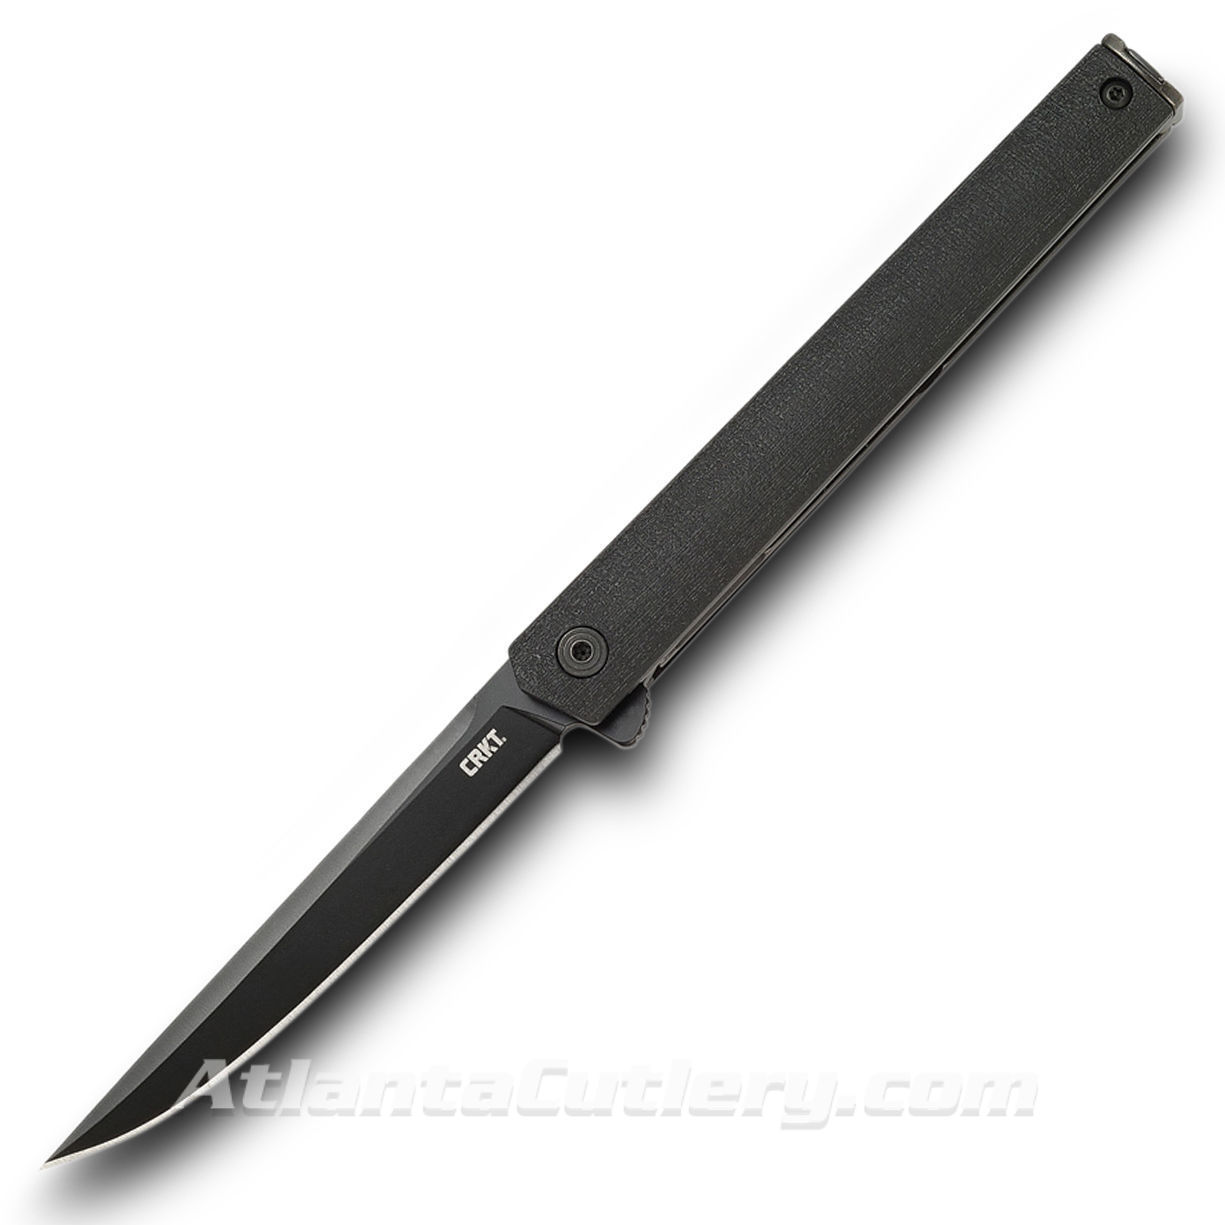 low-profile CEO Linerlock Blackout Flipper has a prominent flipper, lubed ball bearings, satin finished stainless steel blade